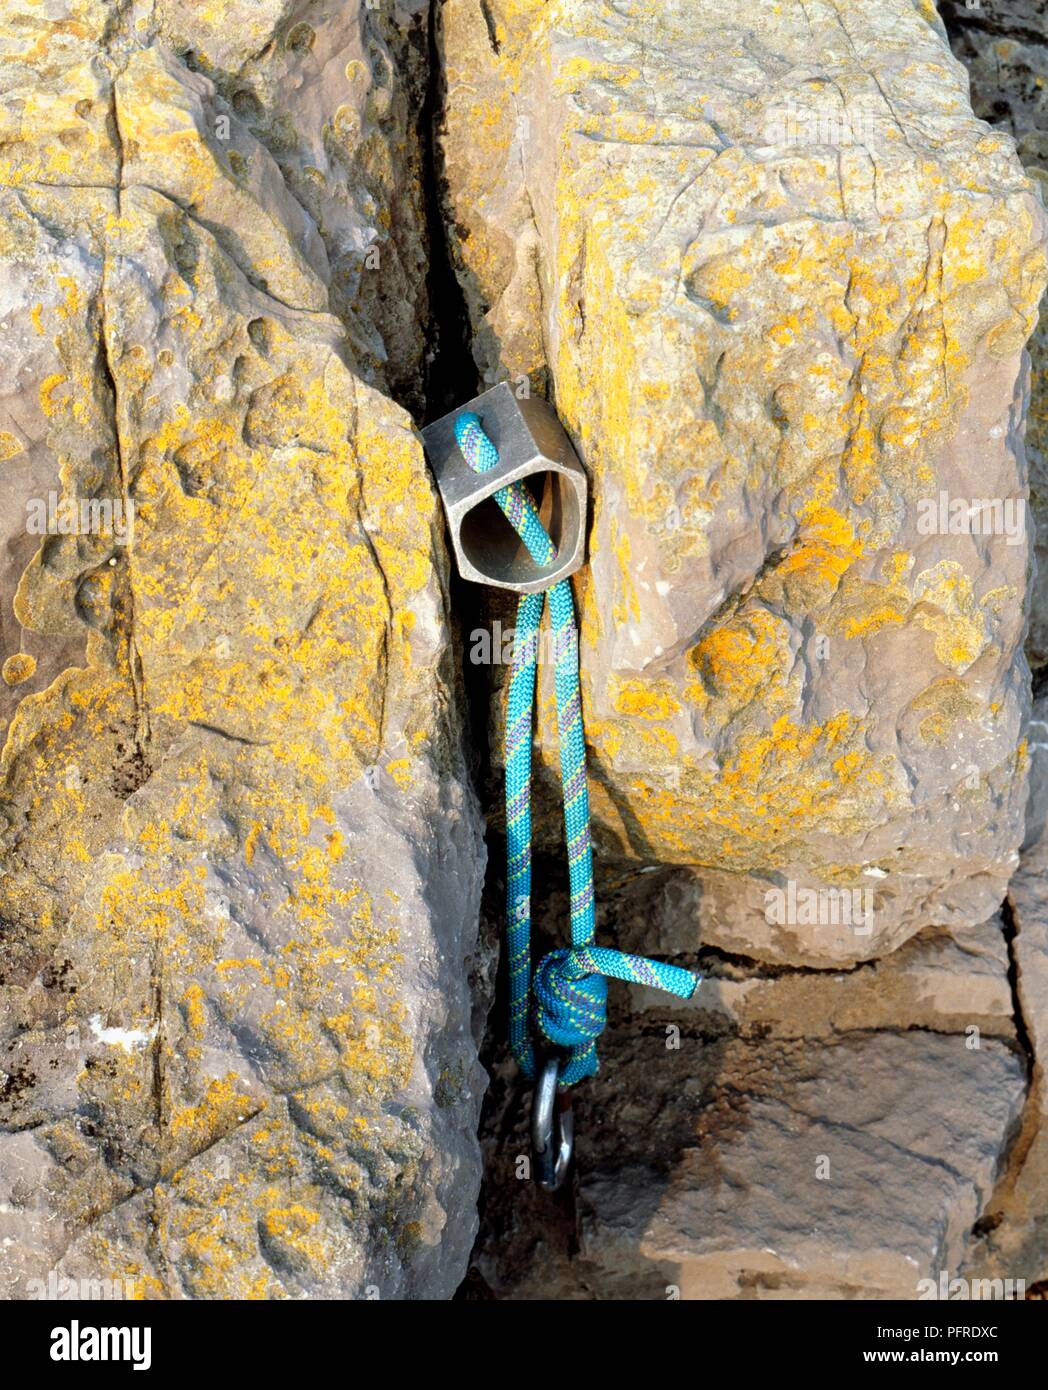 Large hex with rope in rock crevice, close-up Stock Photo